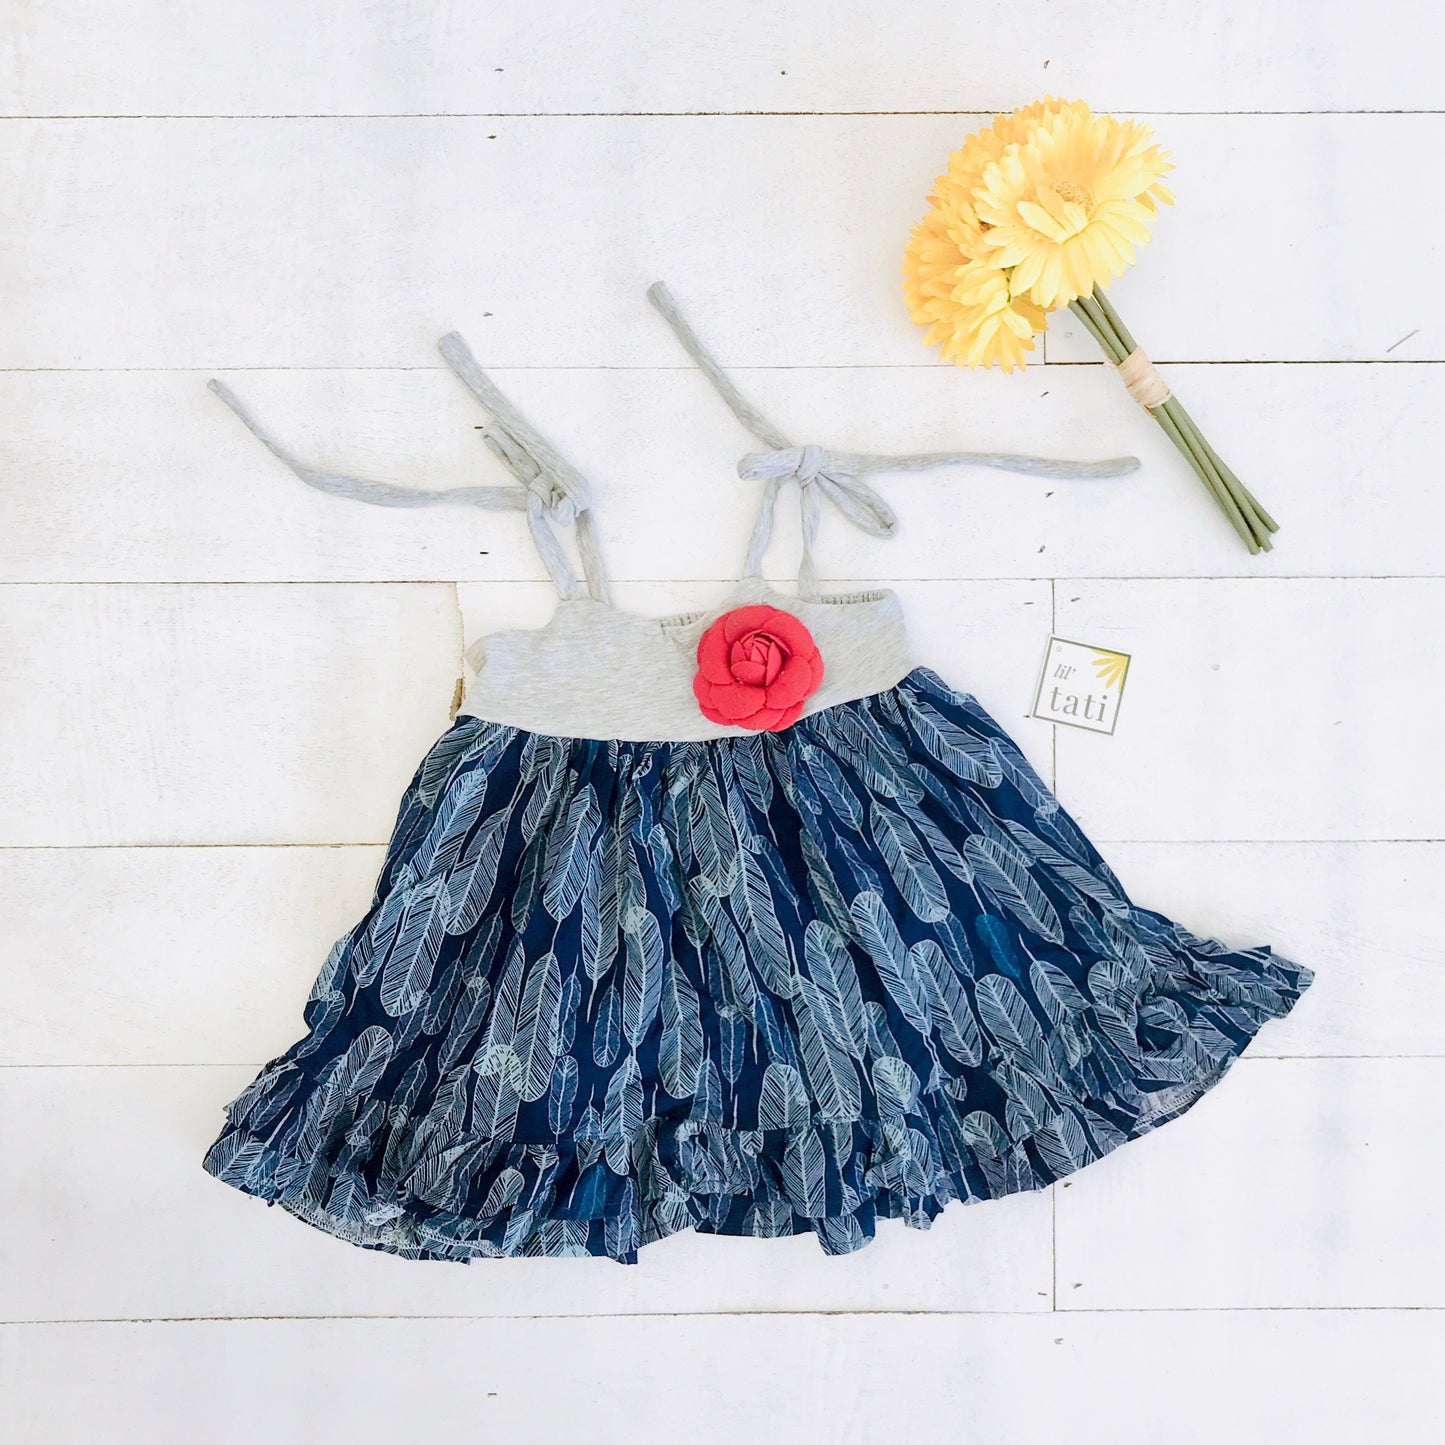 Dahlia Dress - Tie-Strap in Gray Cotton Stretch and Feather Blue - Lil' Tati